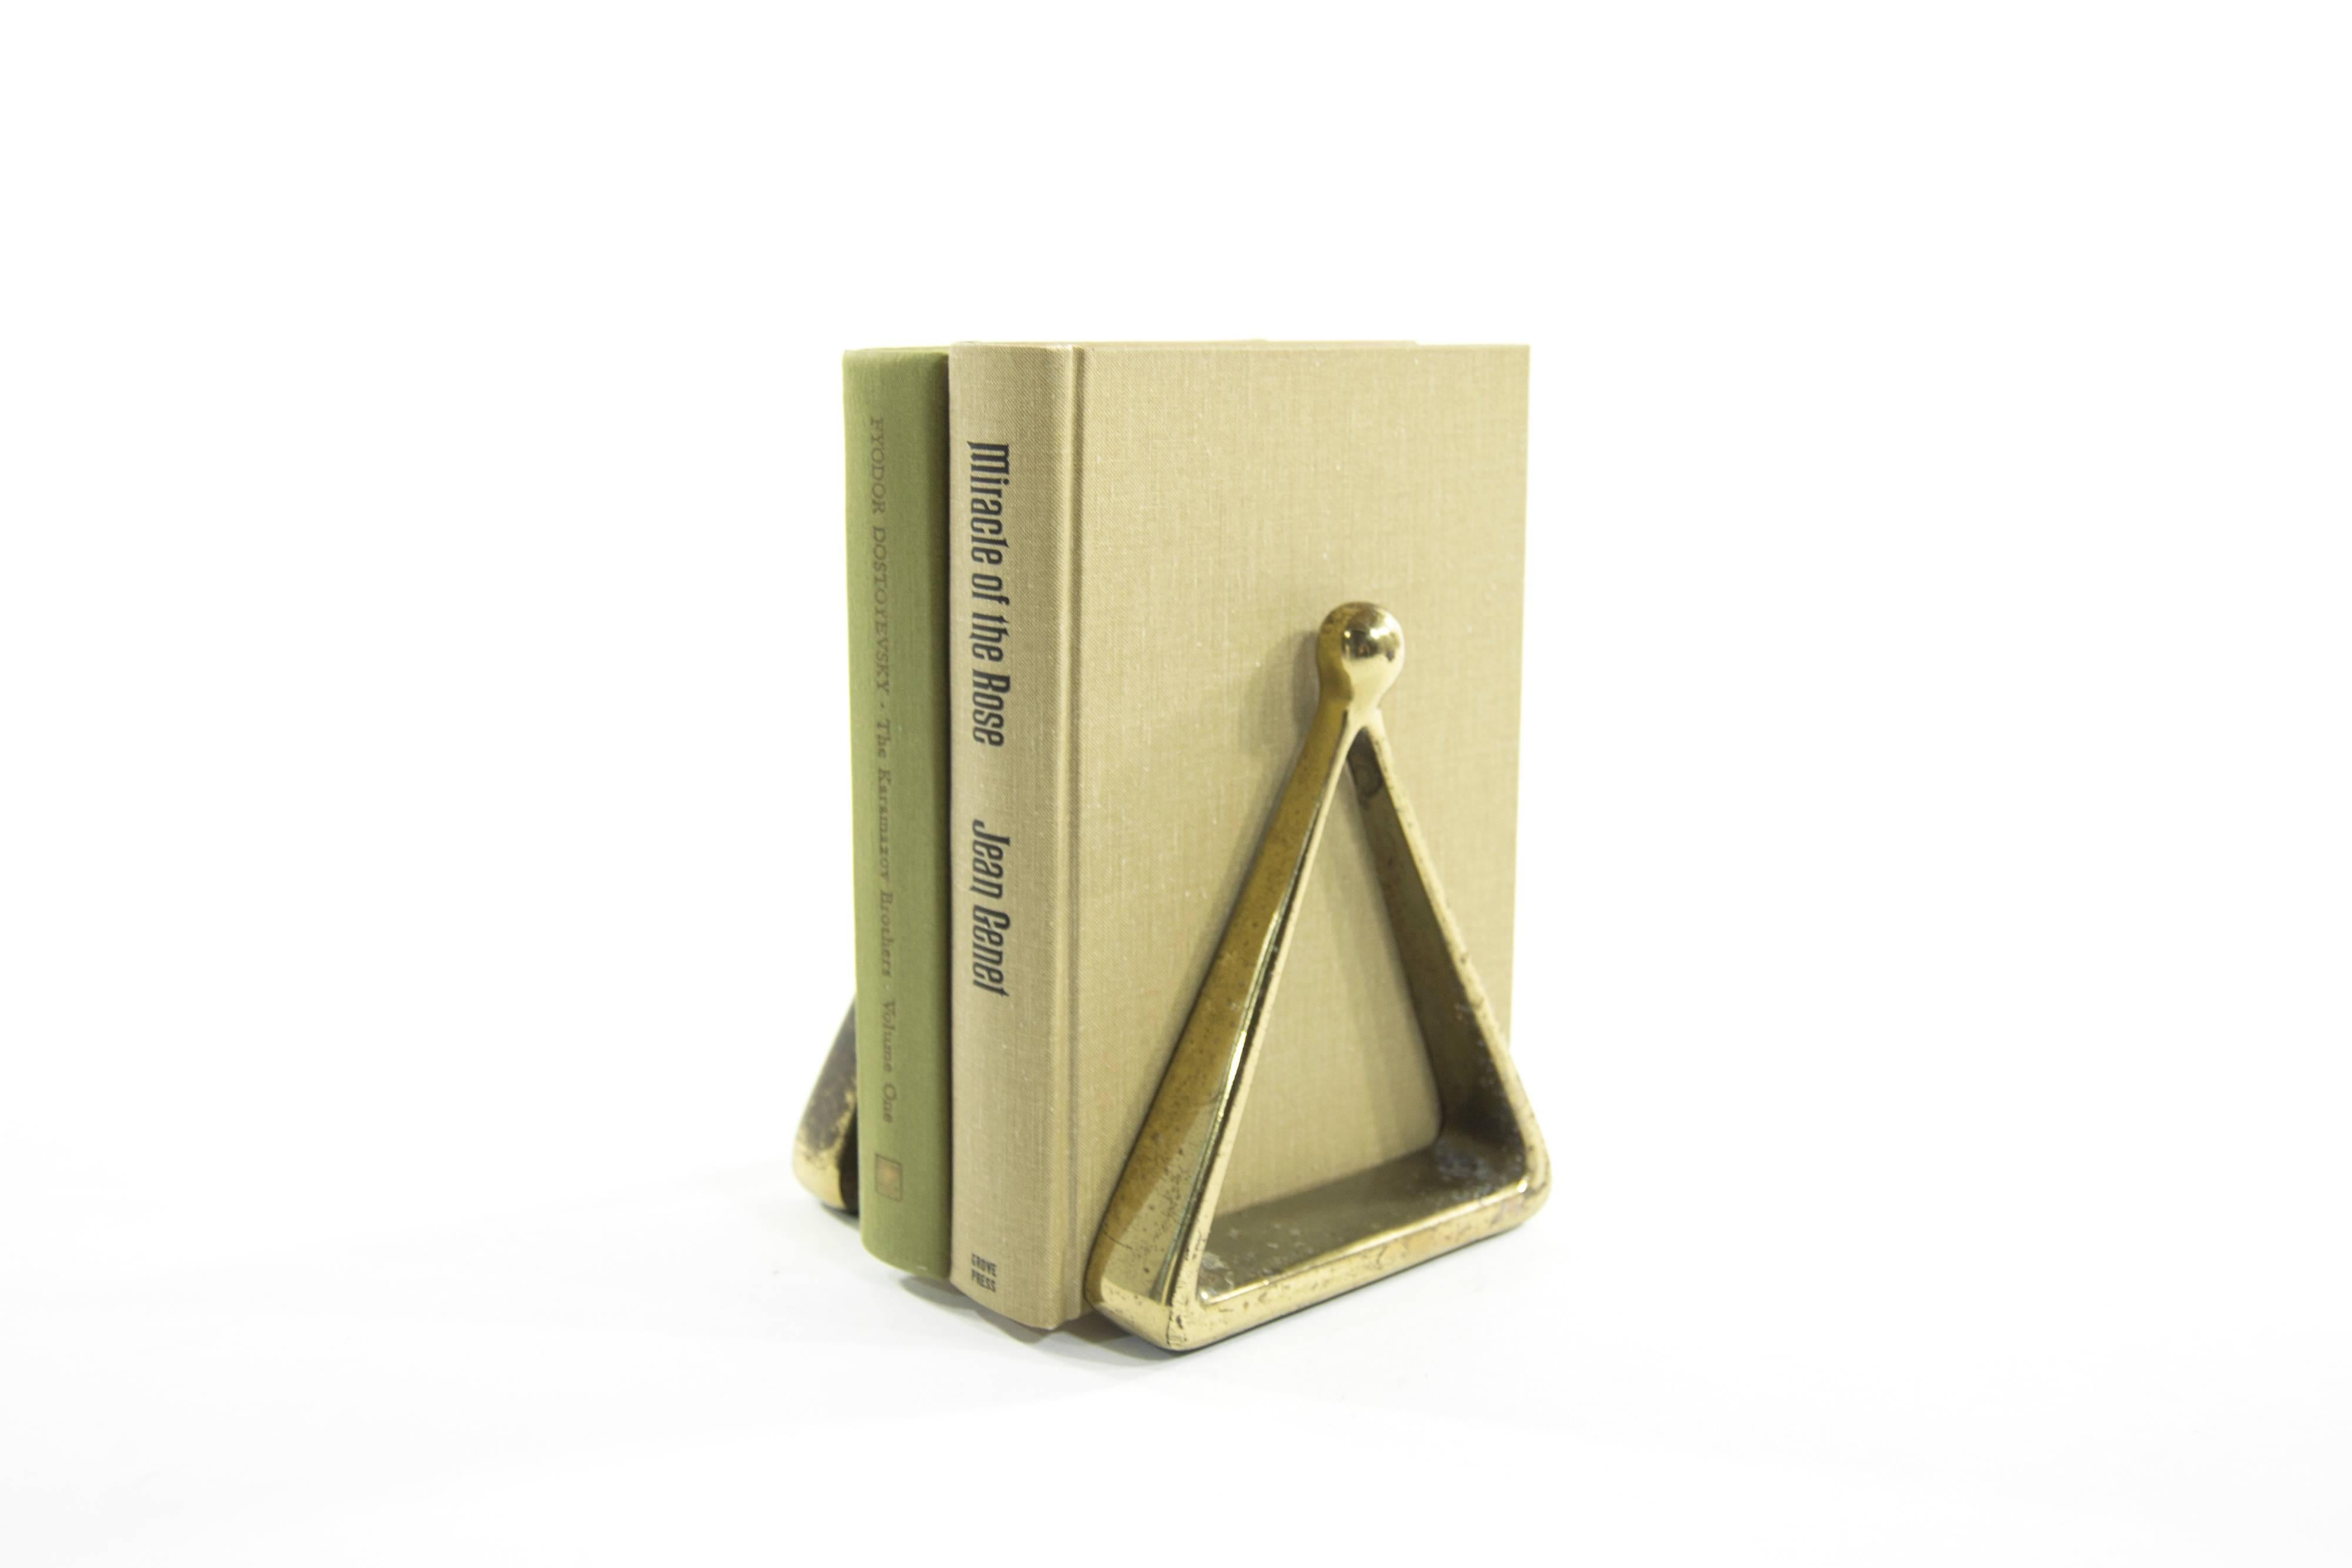 20th Century Pair of Triangular Bookends by Ben Seibel for Jenfred Ware, 1950s